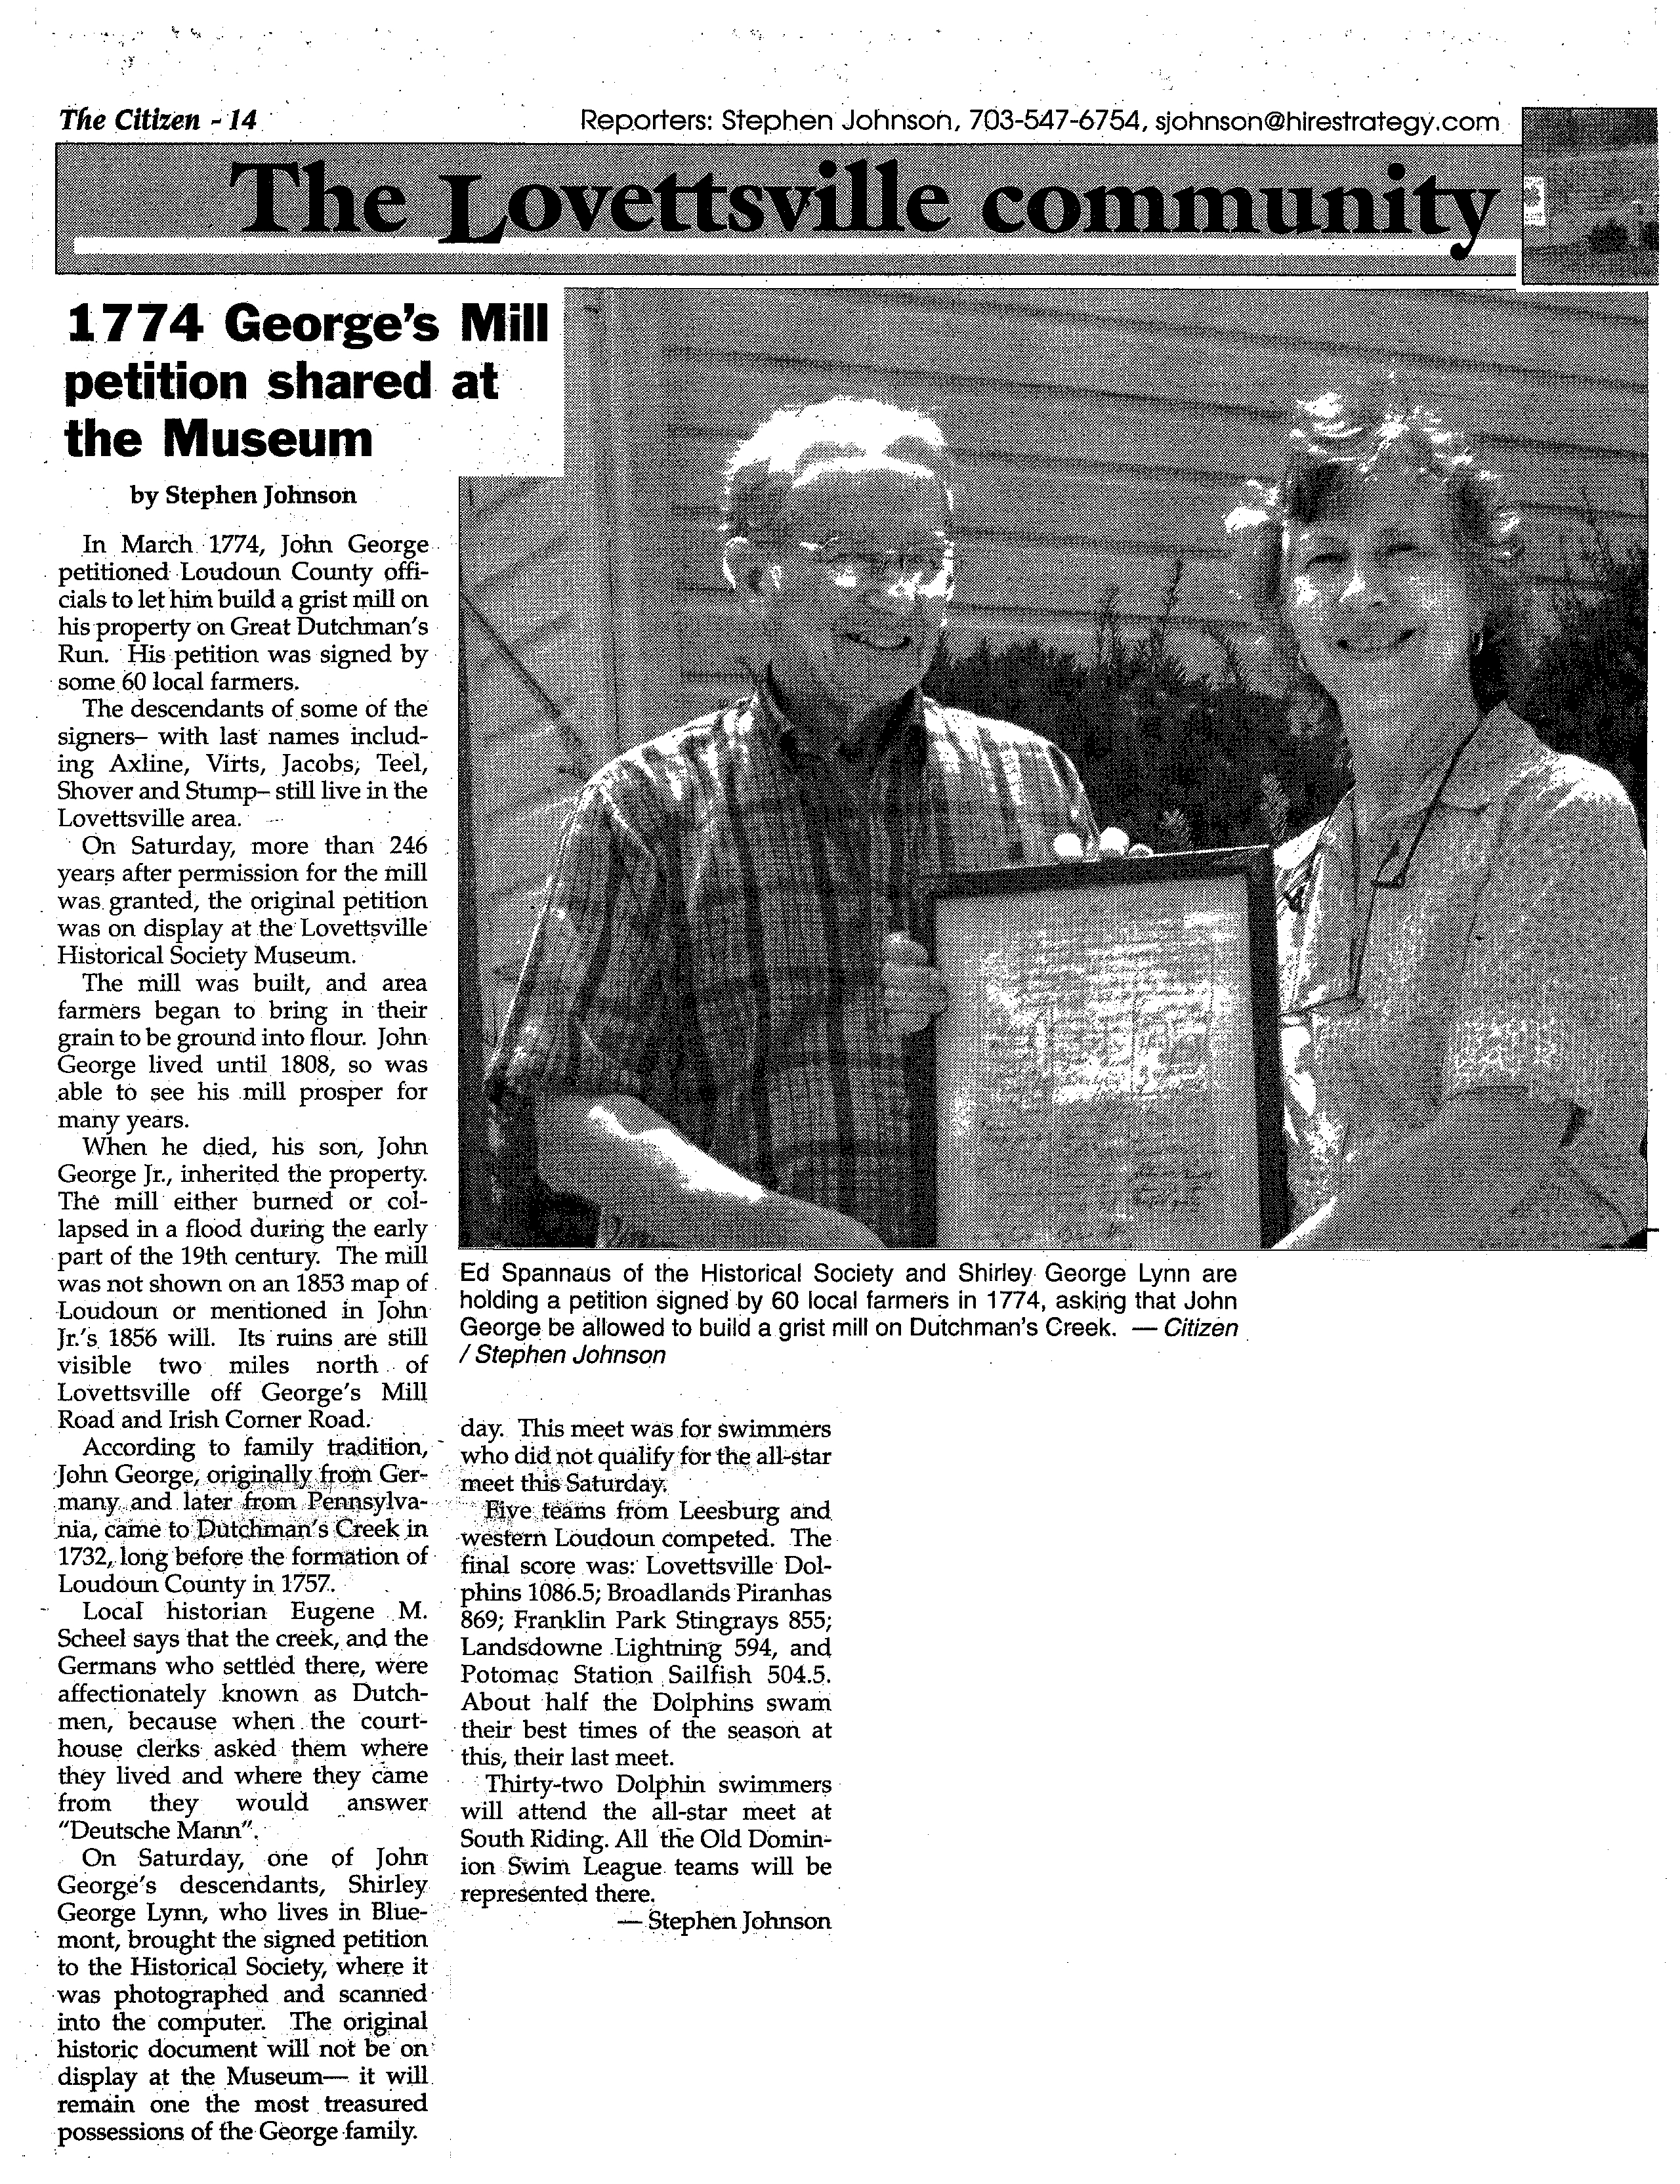 2010-07-29_1774-georges-mill-petition-article-in-brunswick-citizen